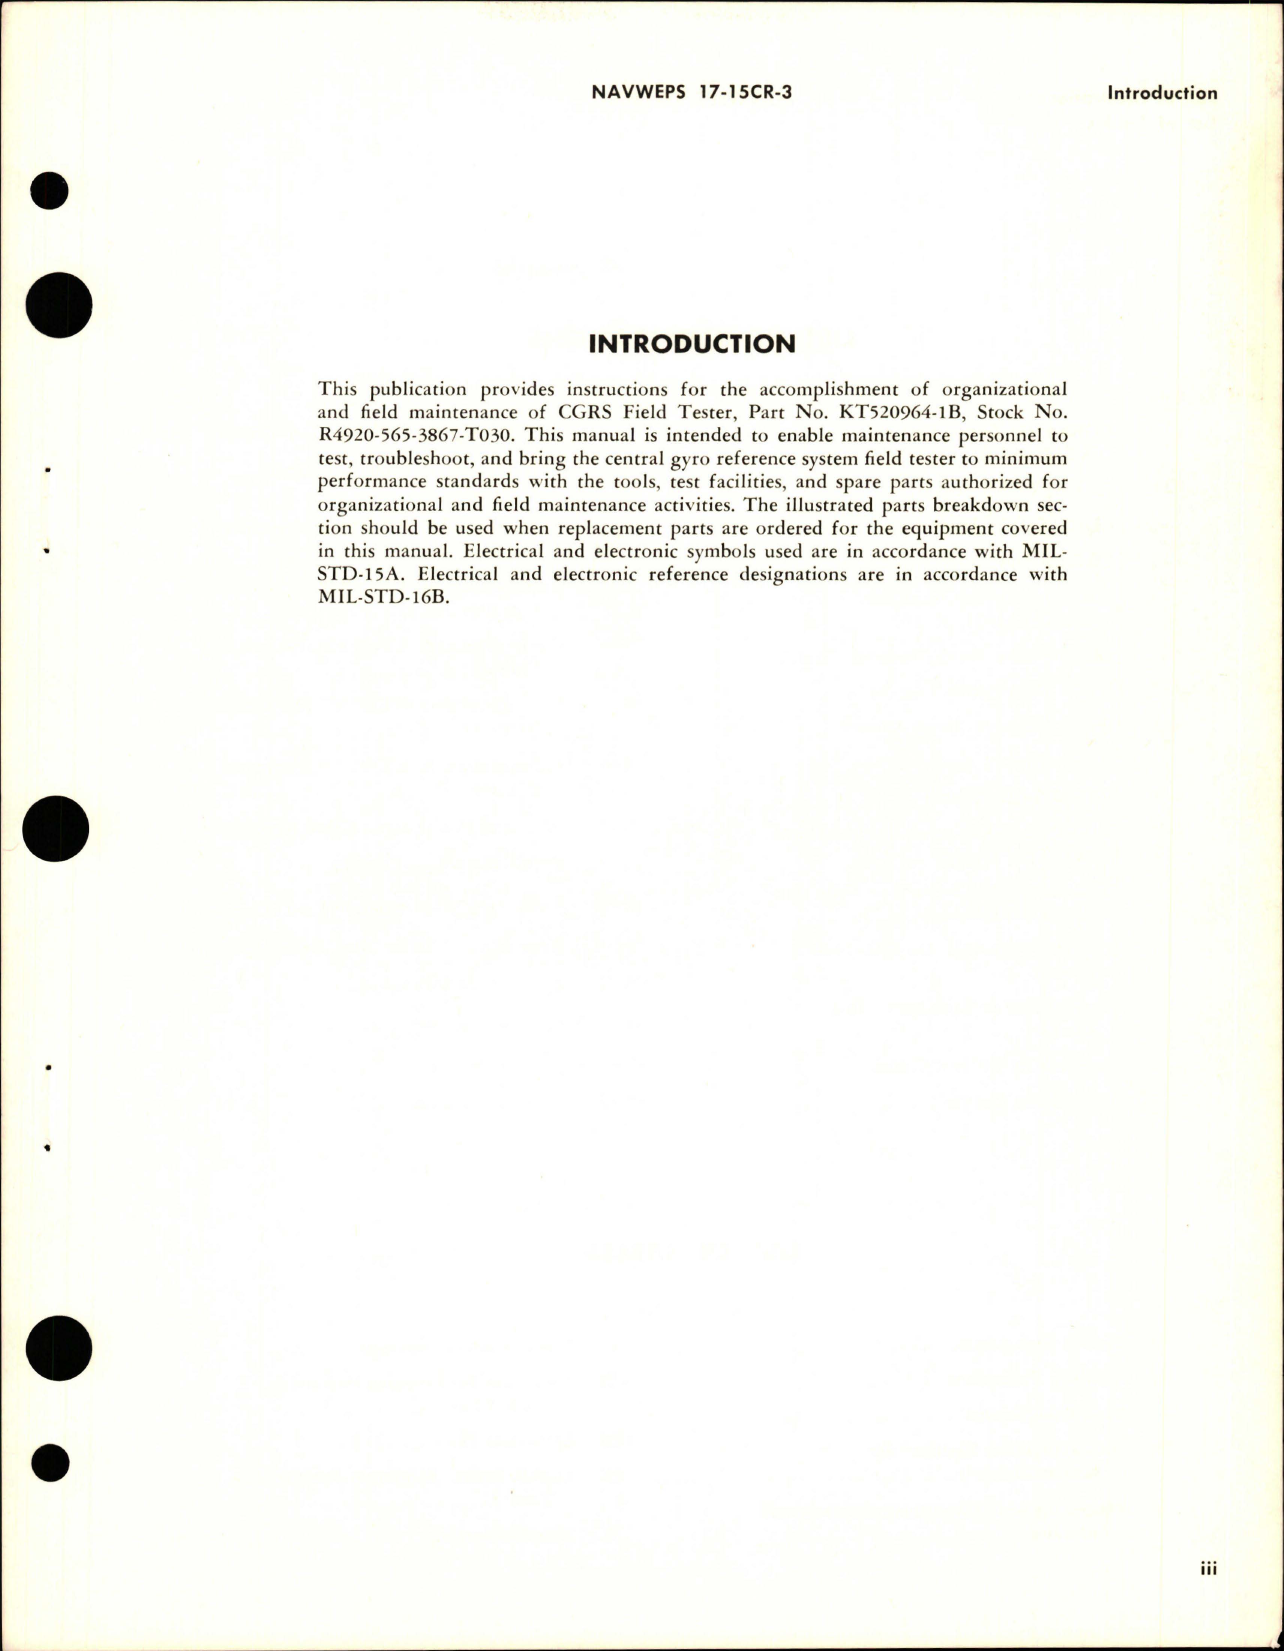 Sample page 5 from AirCorps Library document: Operation and Service Instructions with Illustrated Parts Breakdown for CGRS Field Tester - Part KT520964-1B